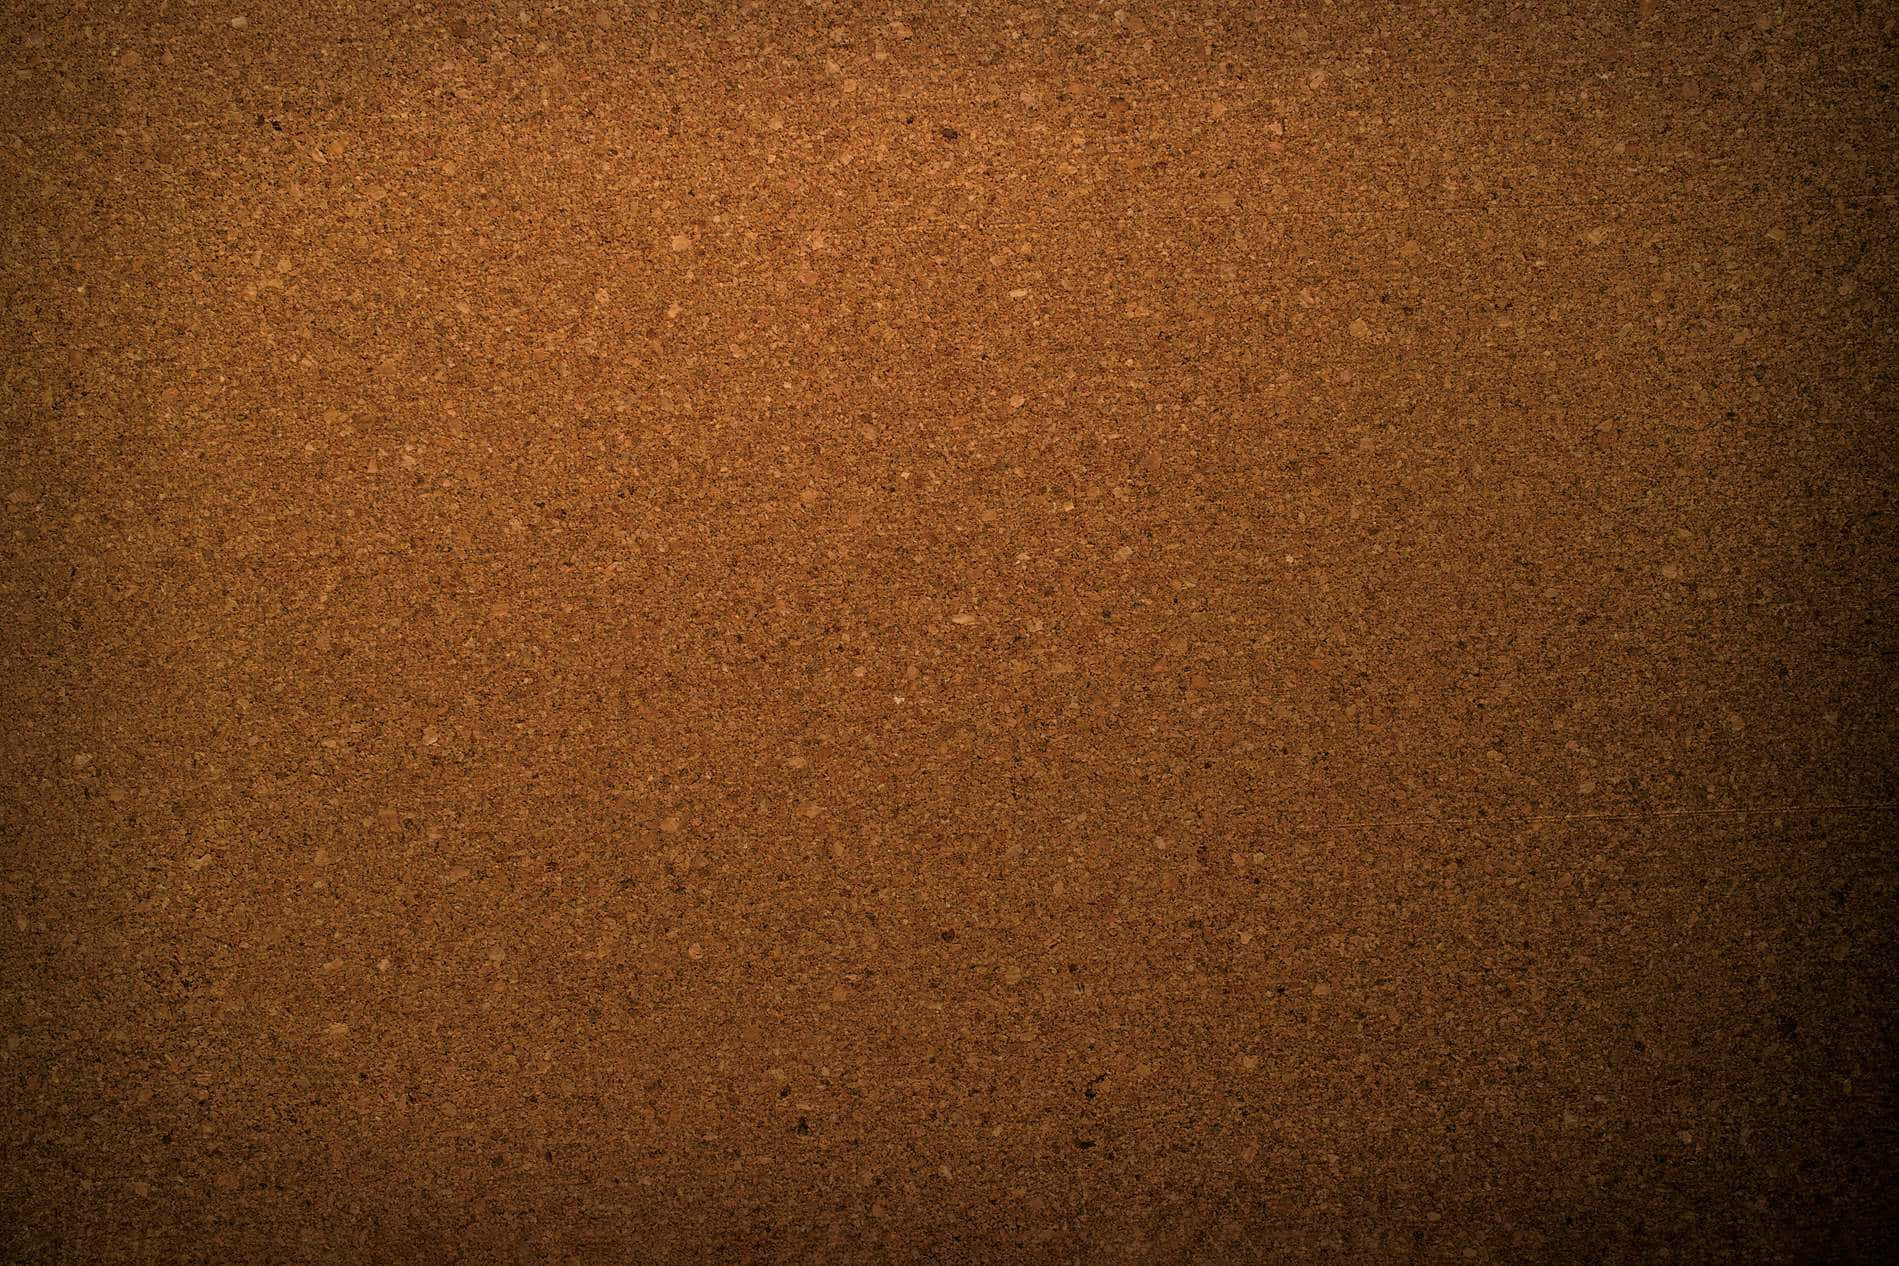 A Brown Cork Board With A Light Shining On It